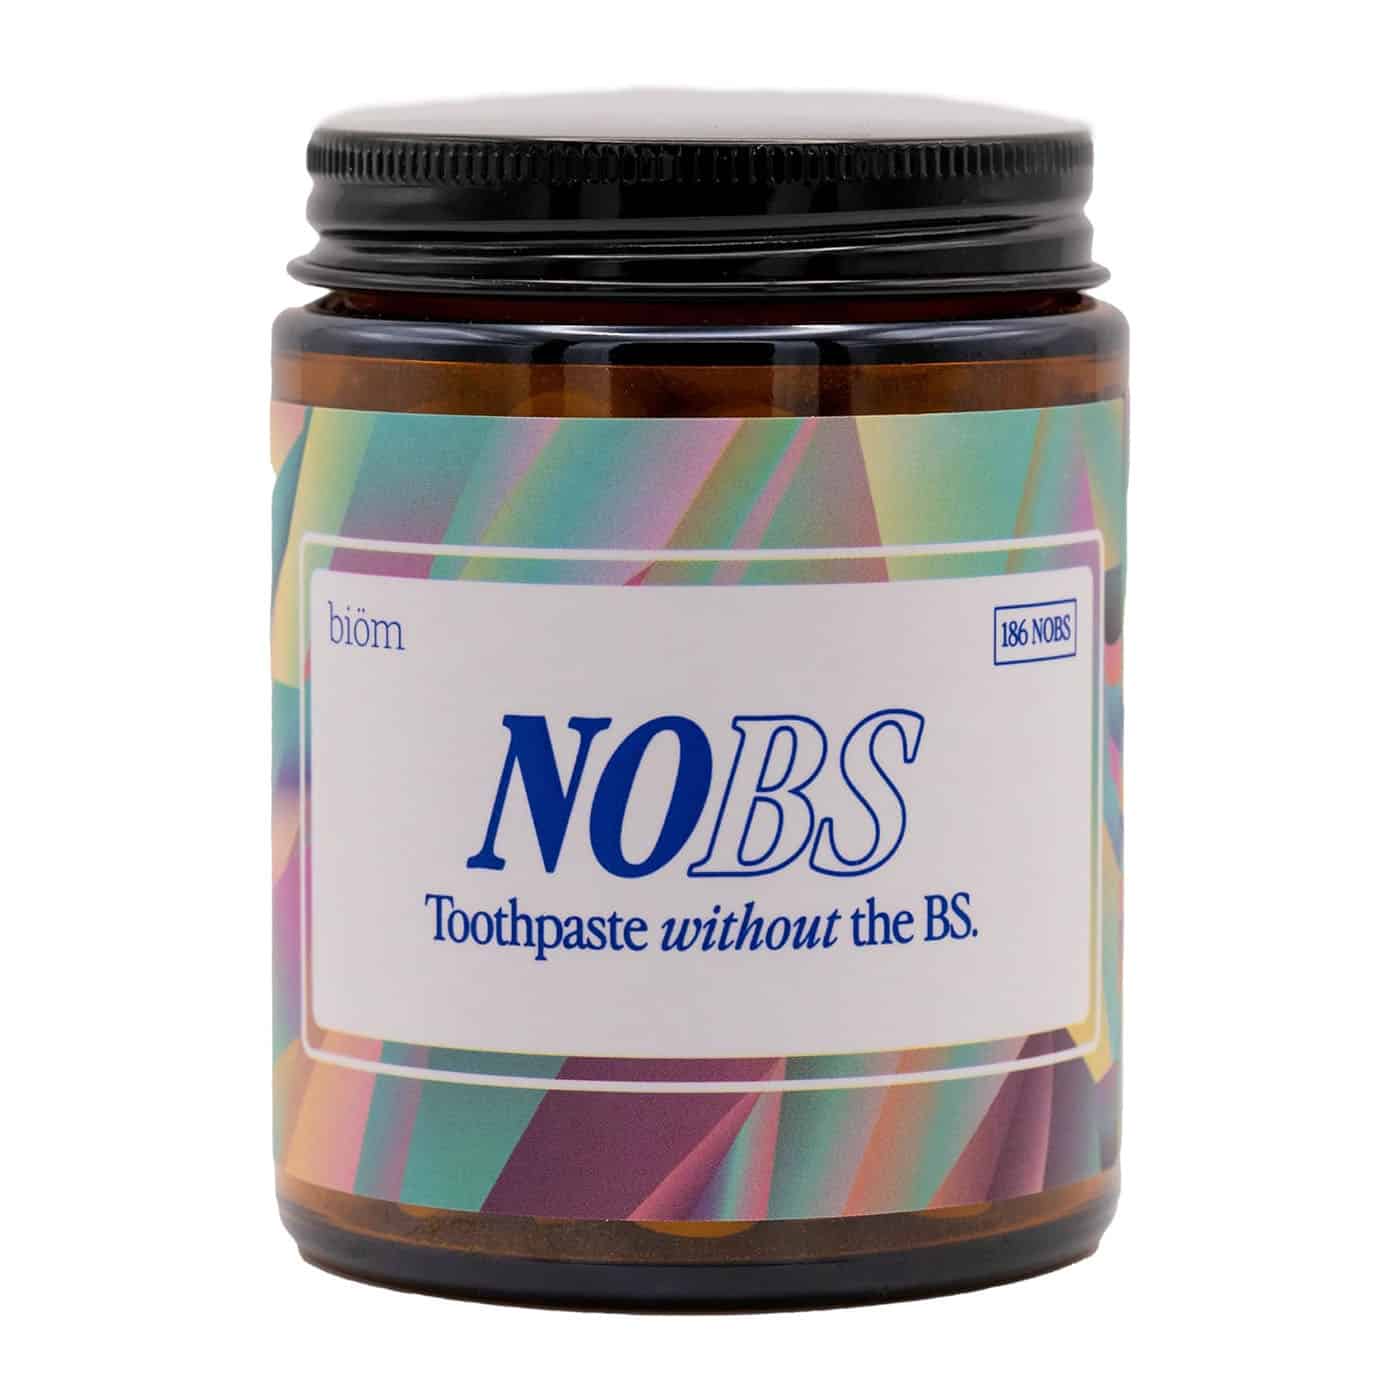 NOBS Toothpaste Tablets with Nano Hydroxyapatite